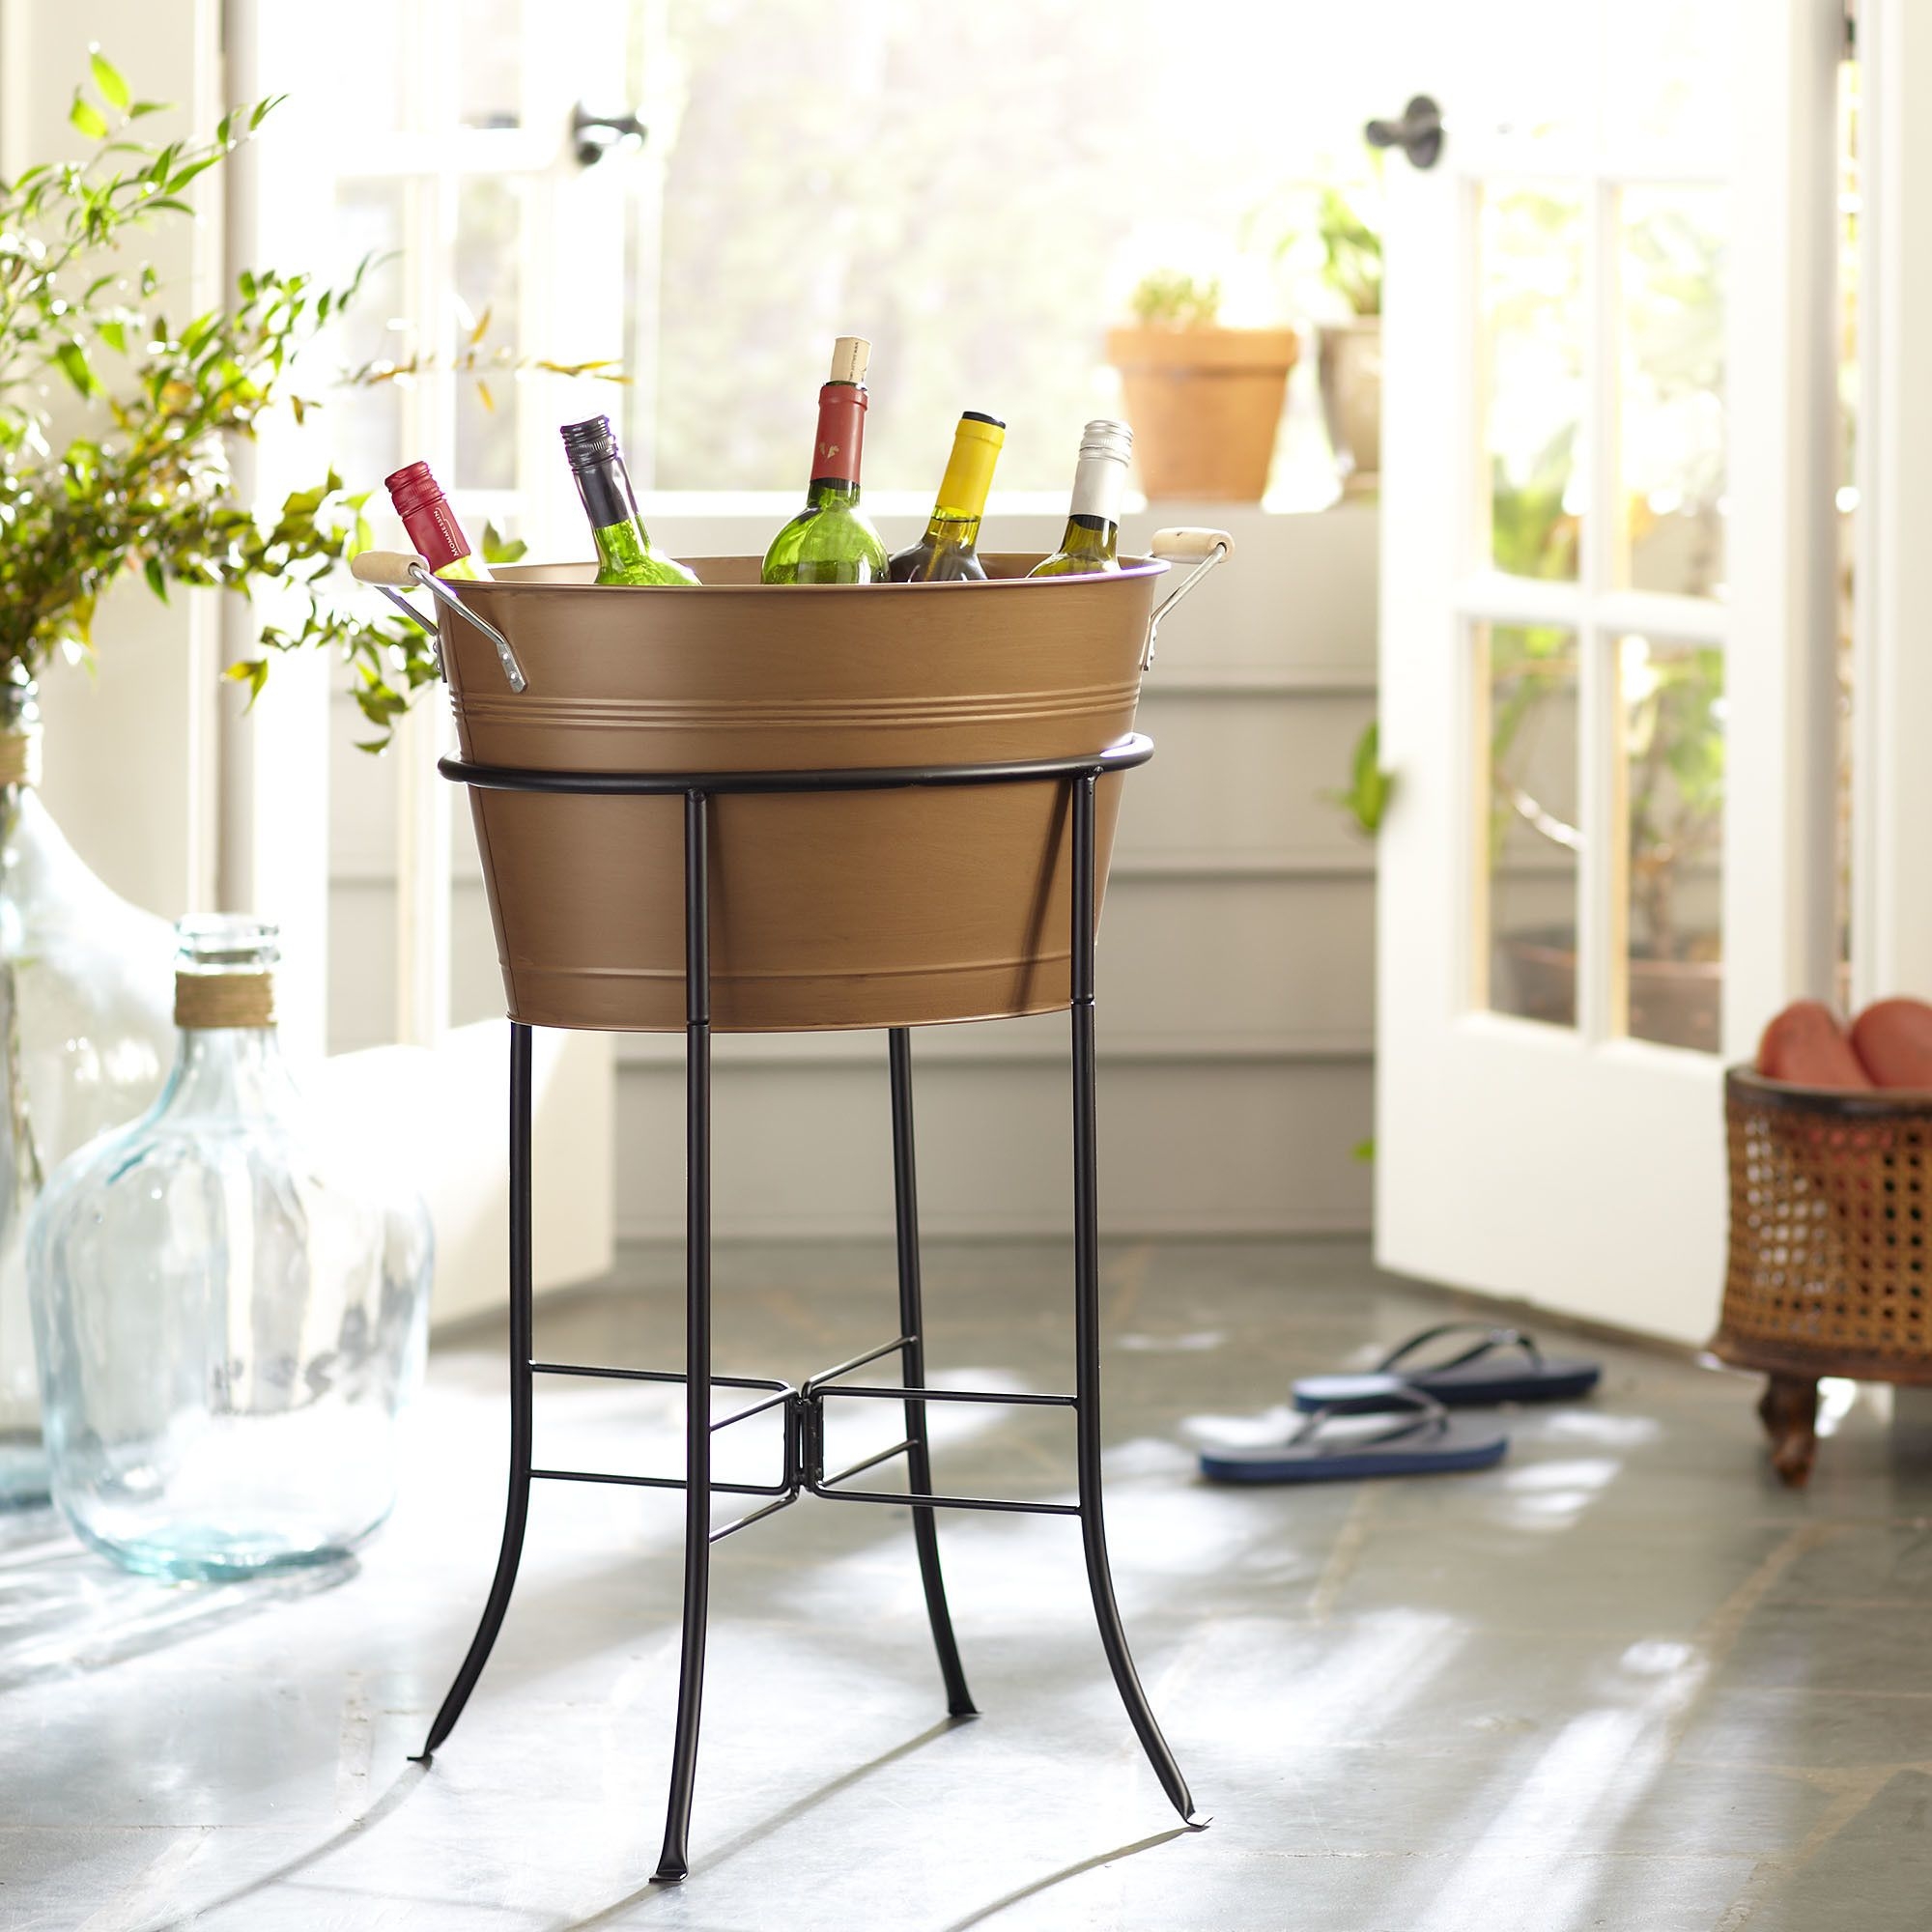 Galvanized beverage tub with stand 5